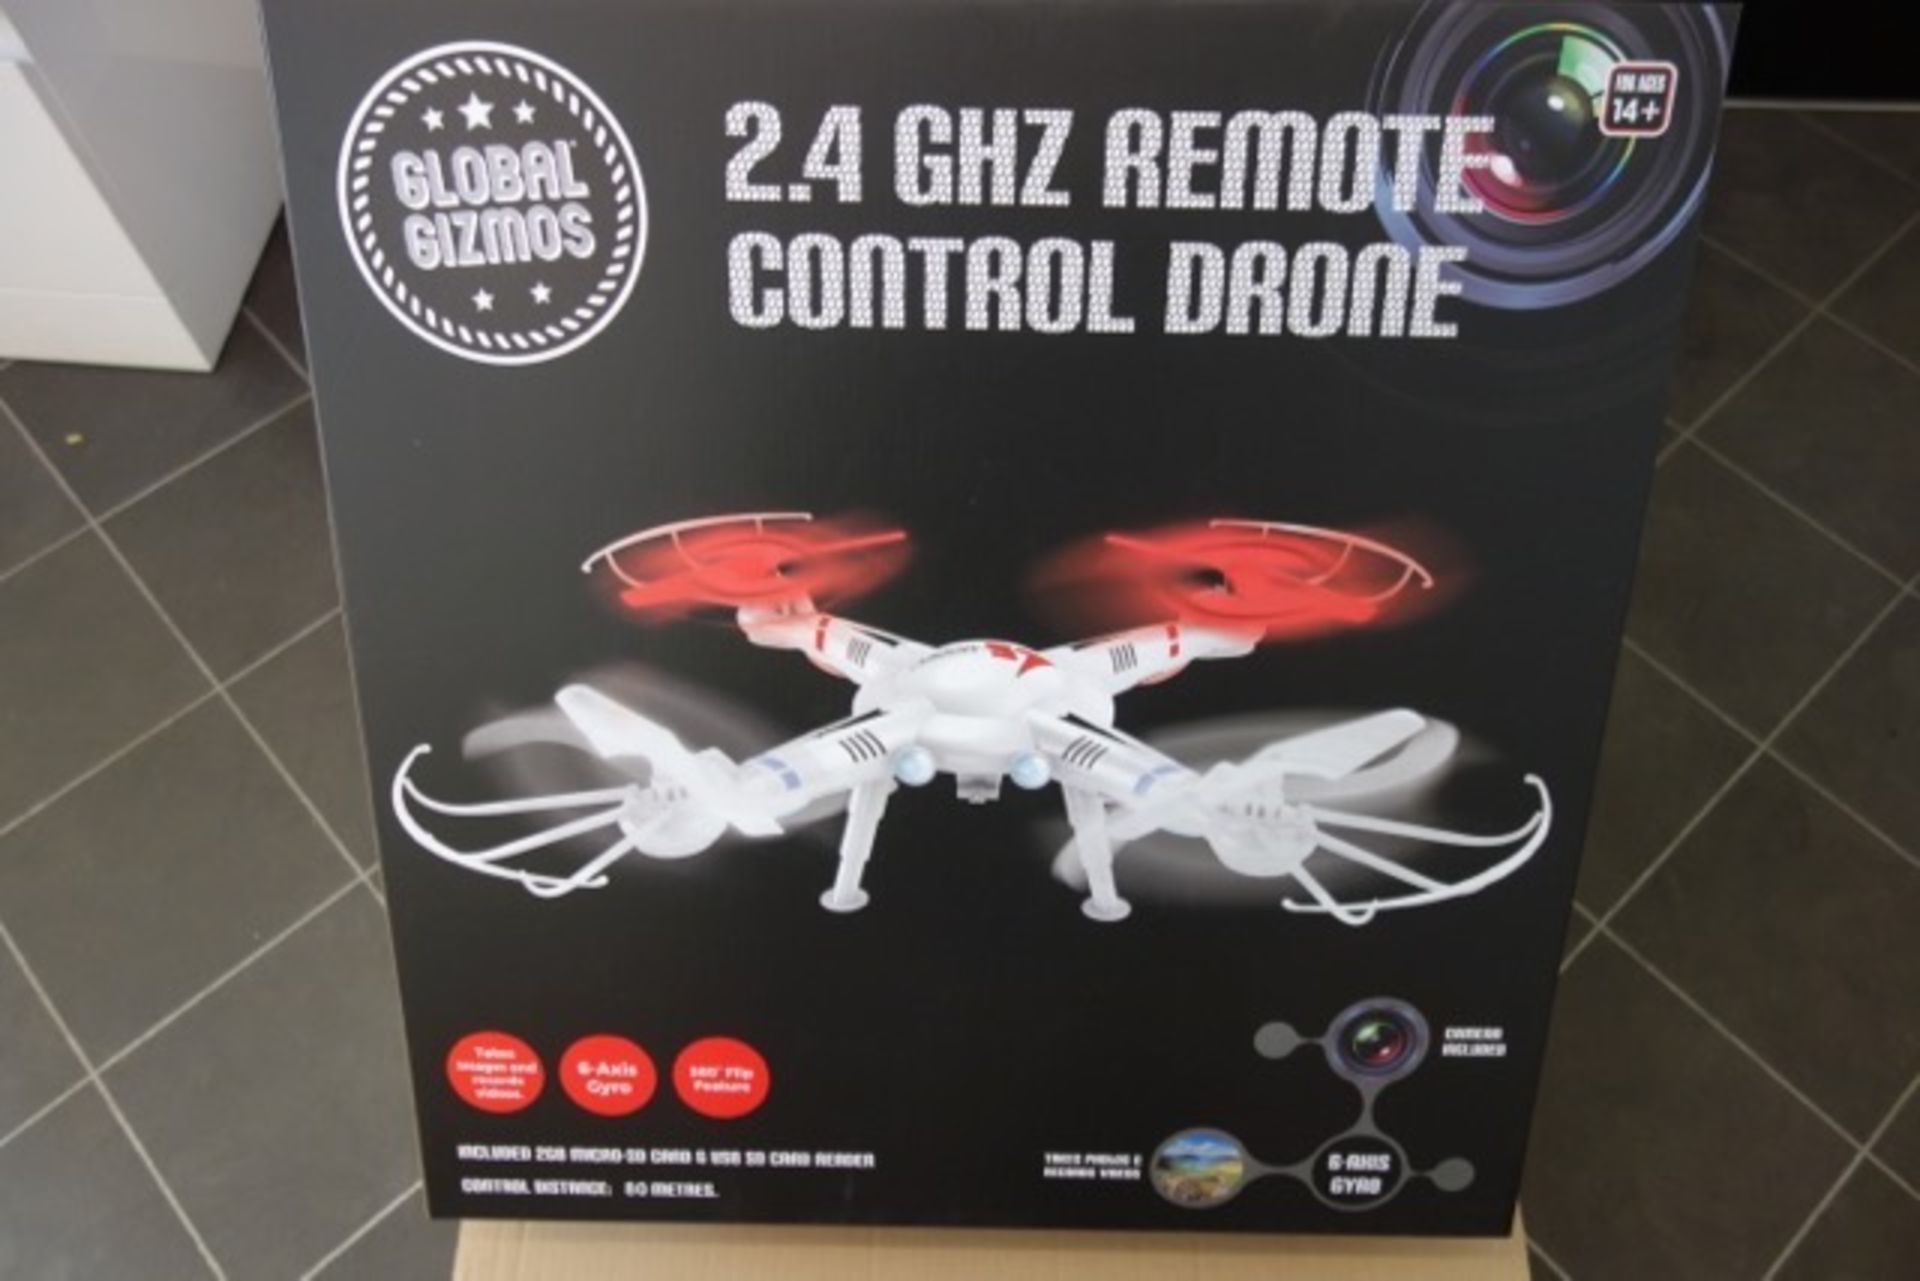 4 x Brand New Global Gizmos 2.4GHZ Remote Control Drone. - Image 4 of 4